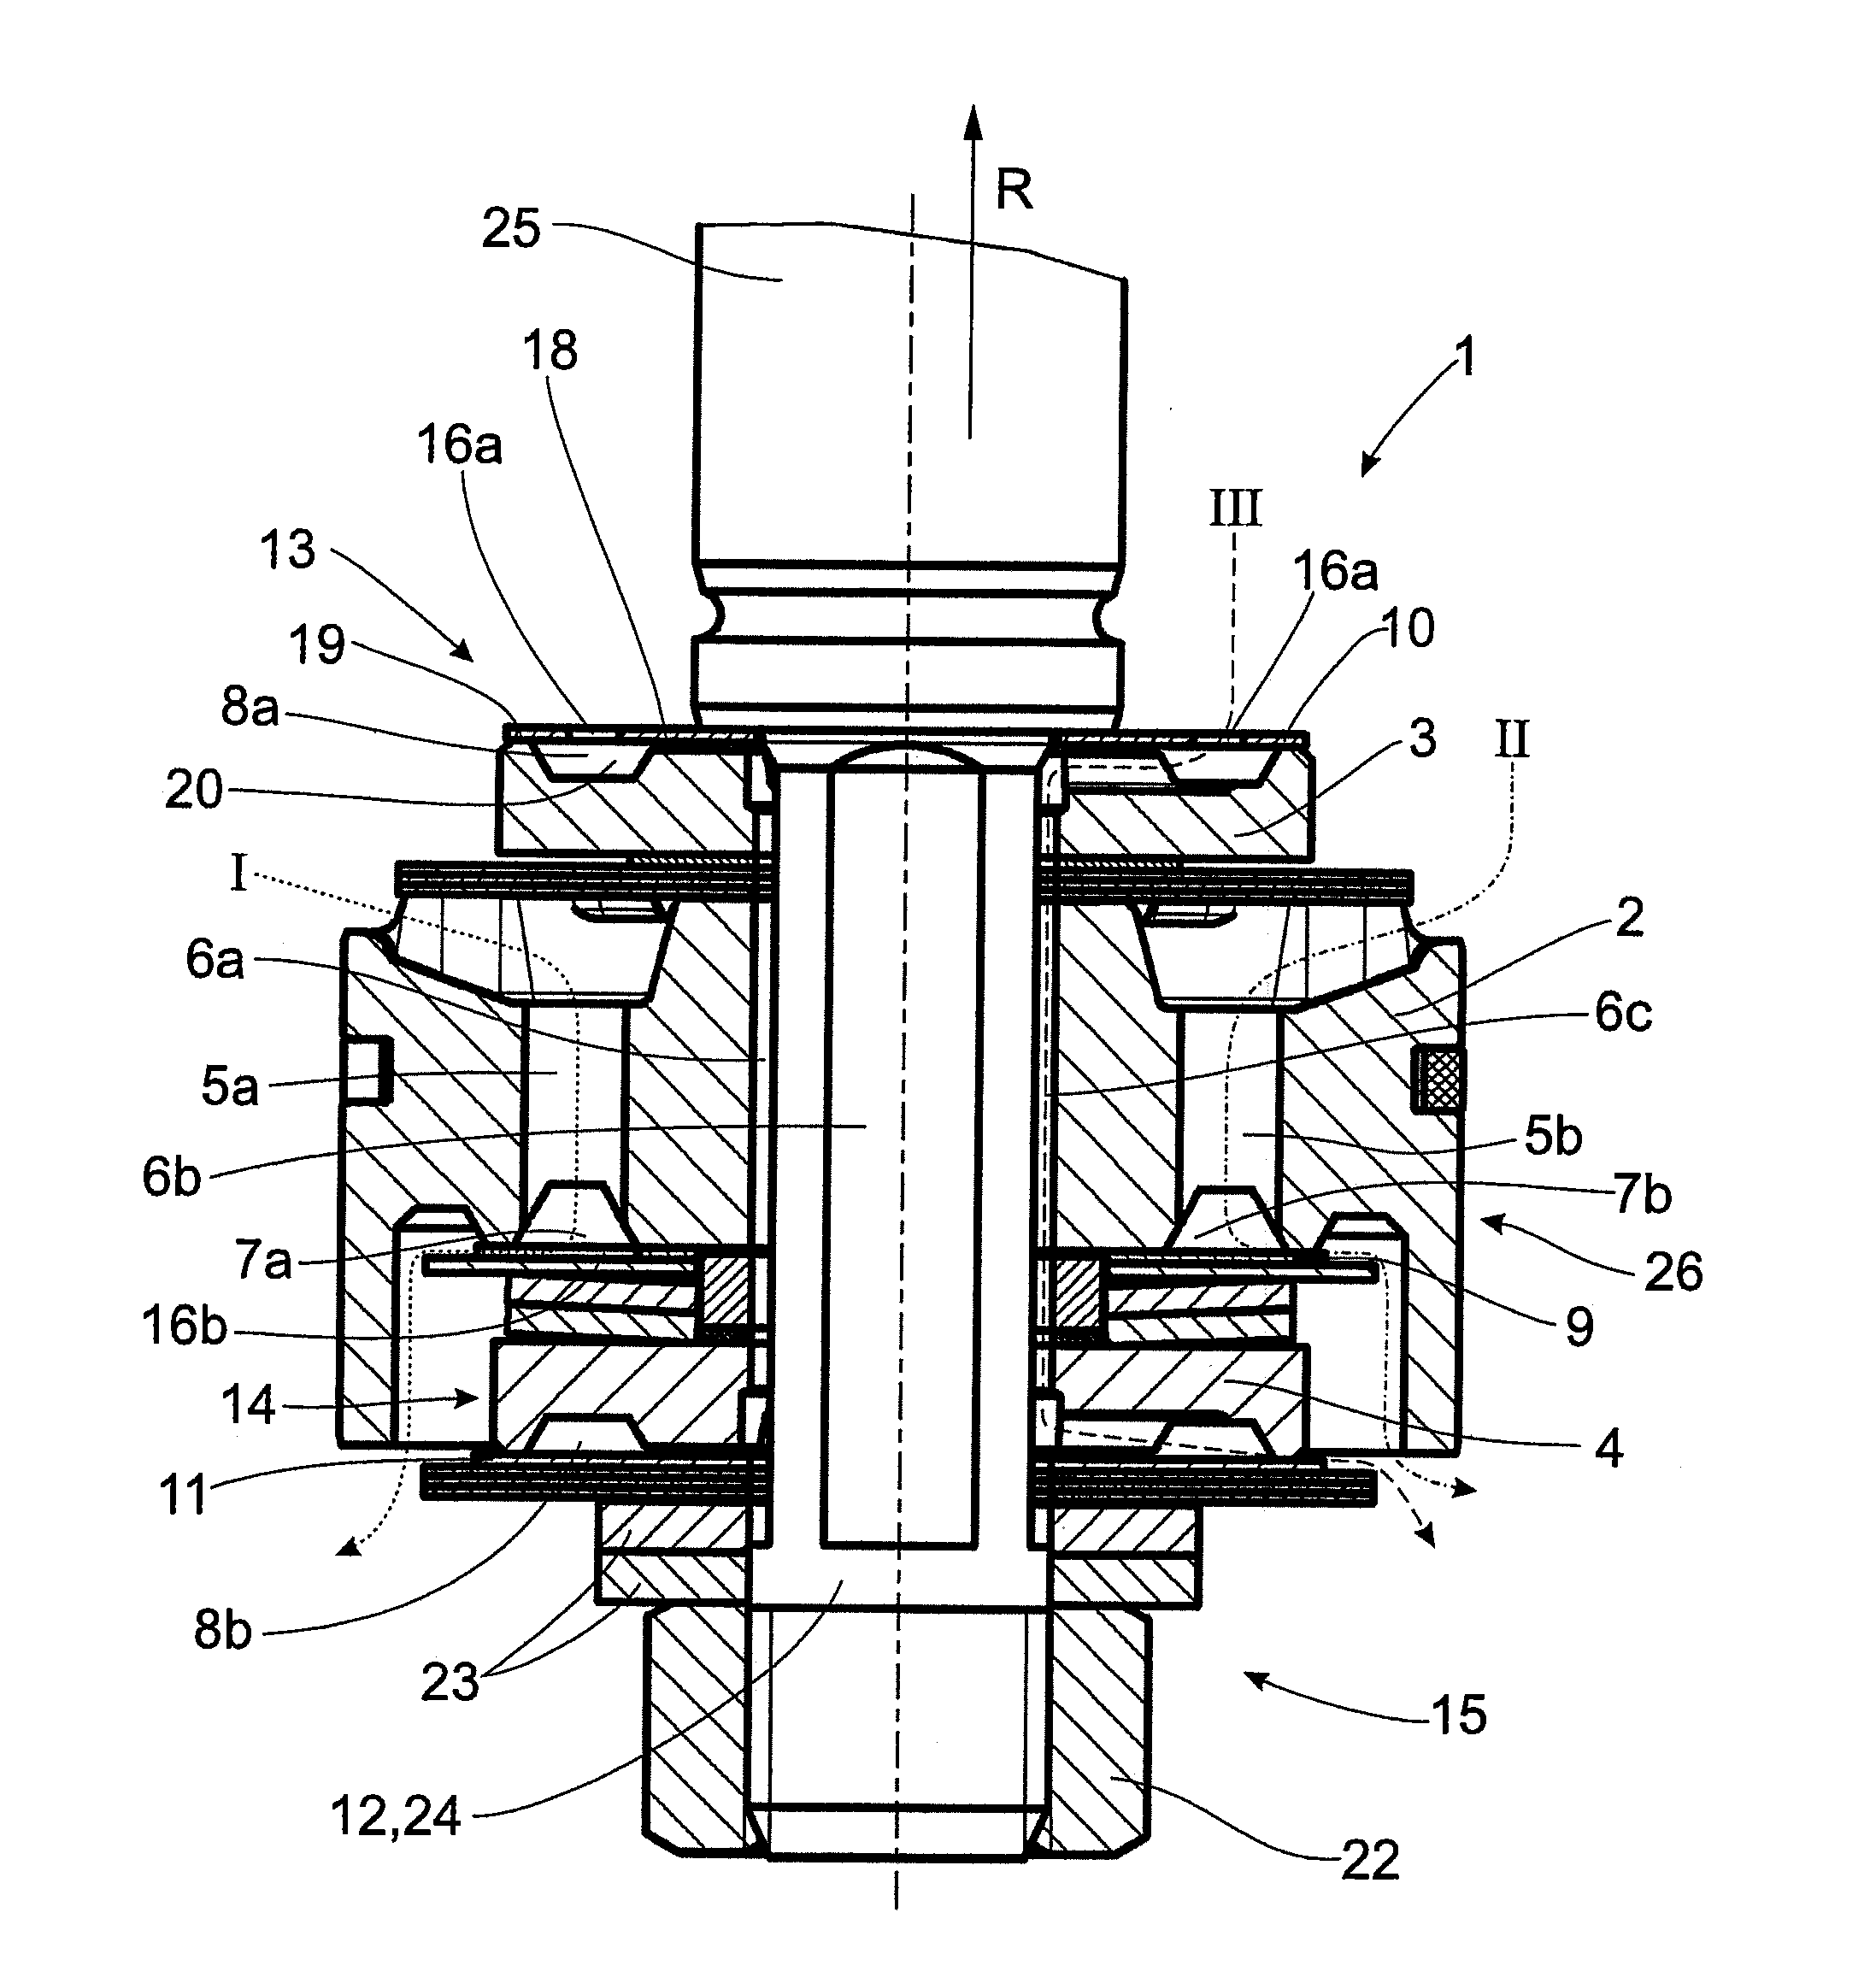 Damping Valve Arrangement With A Multistage Damping Force Characteristic